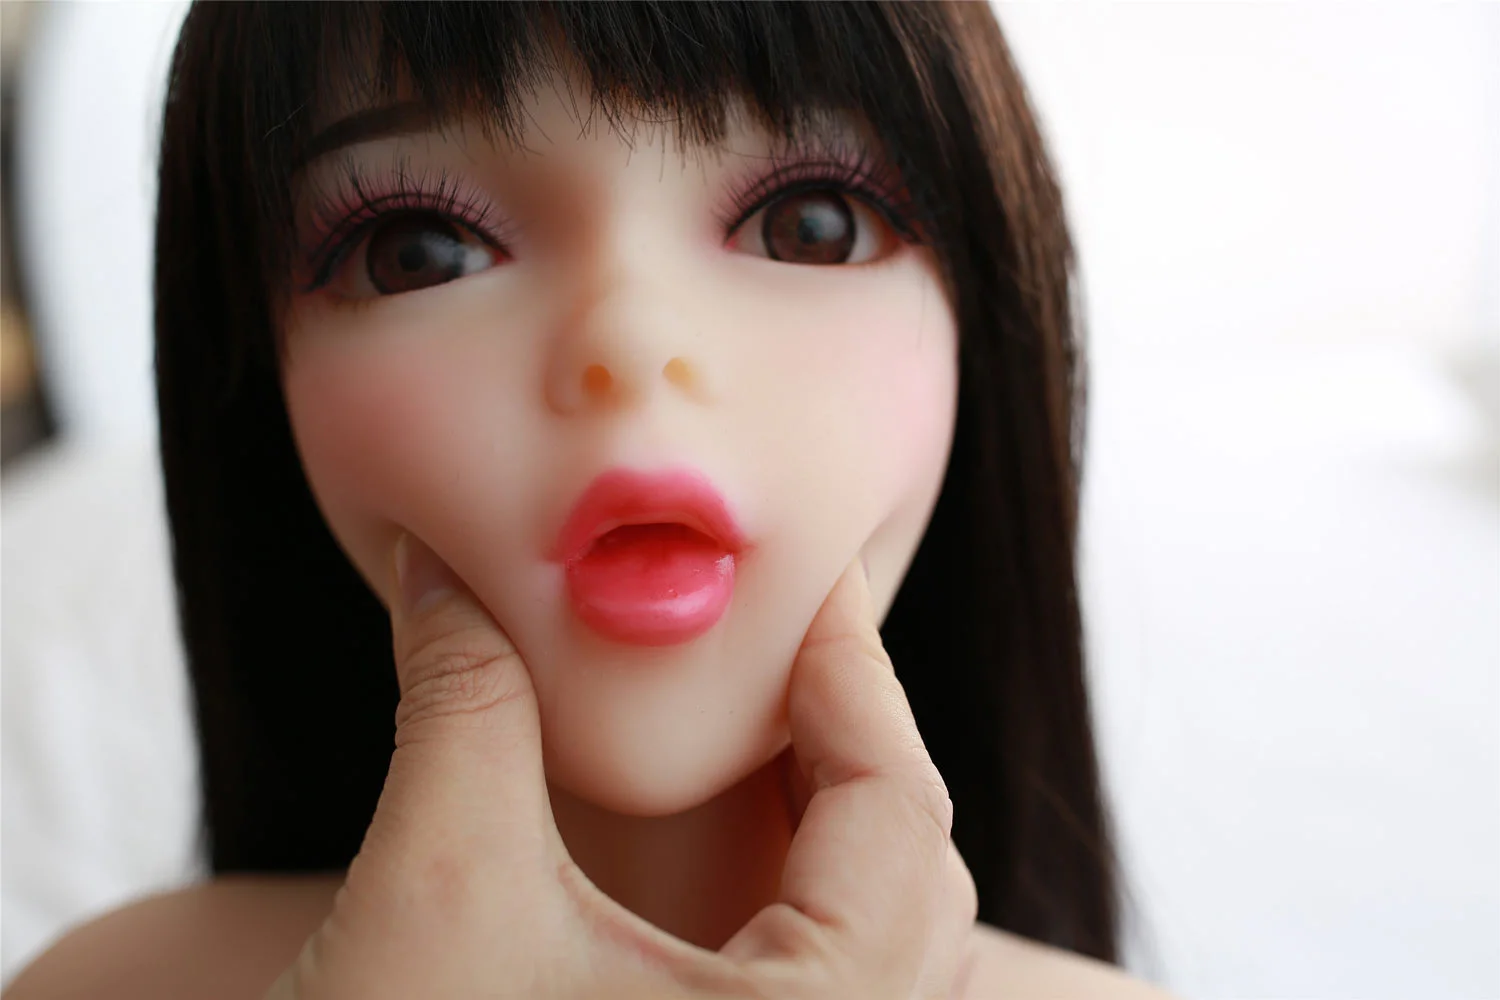 Mini sex doll with someone holding his chin